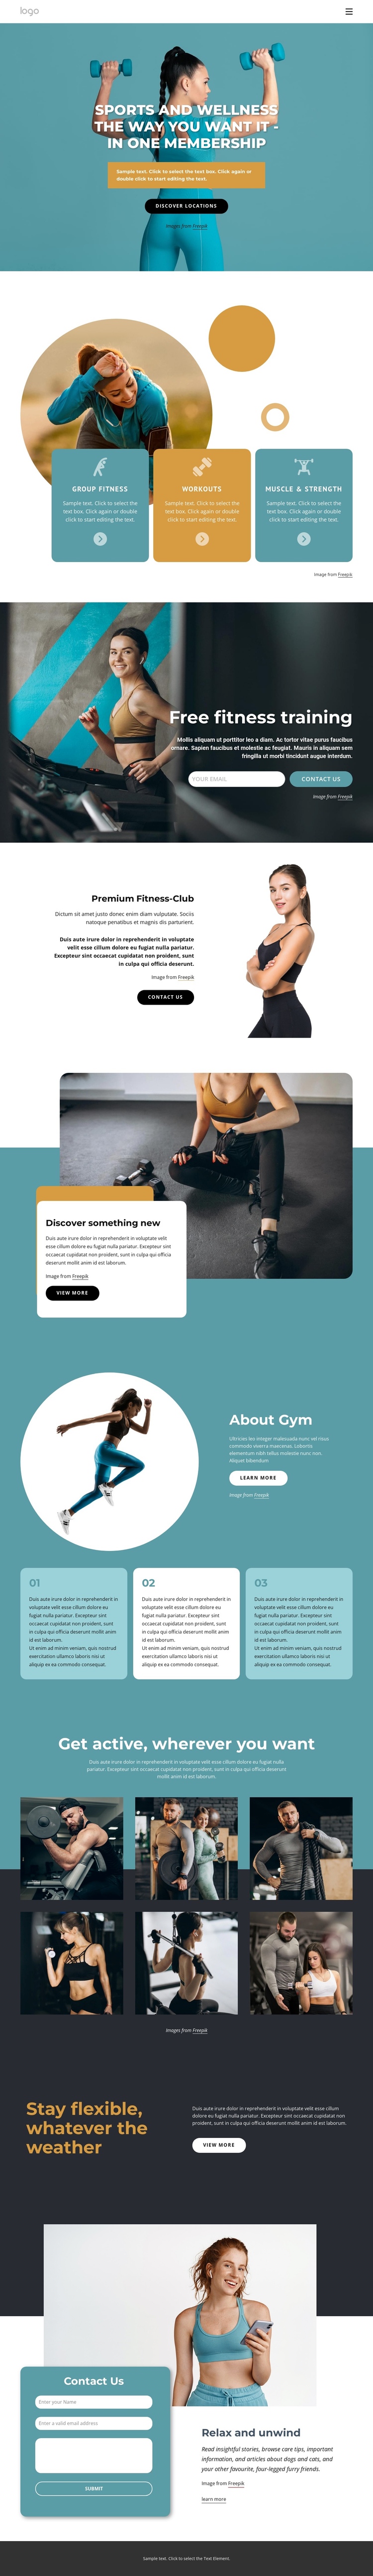 Workout anywhere with one membership One Page Template